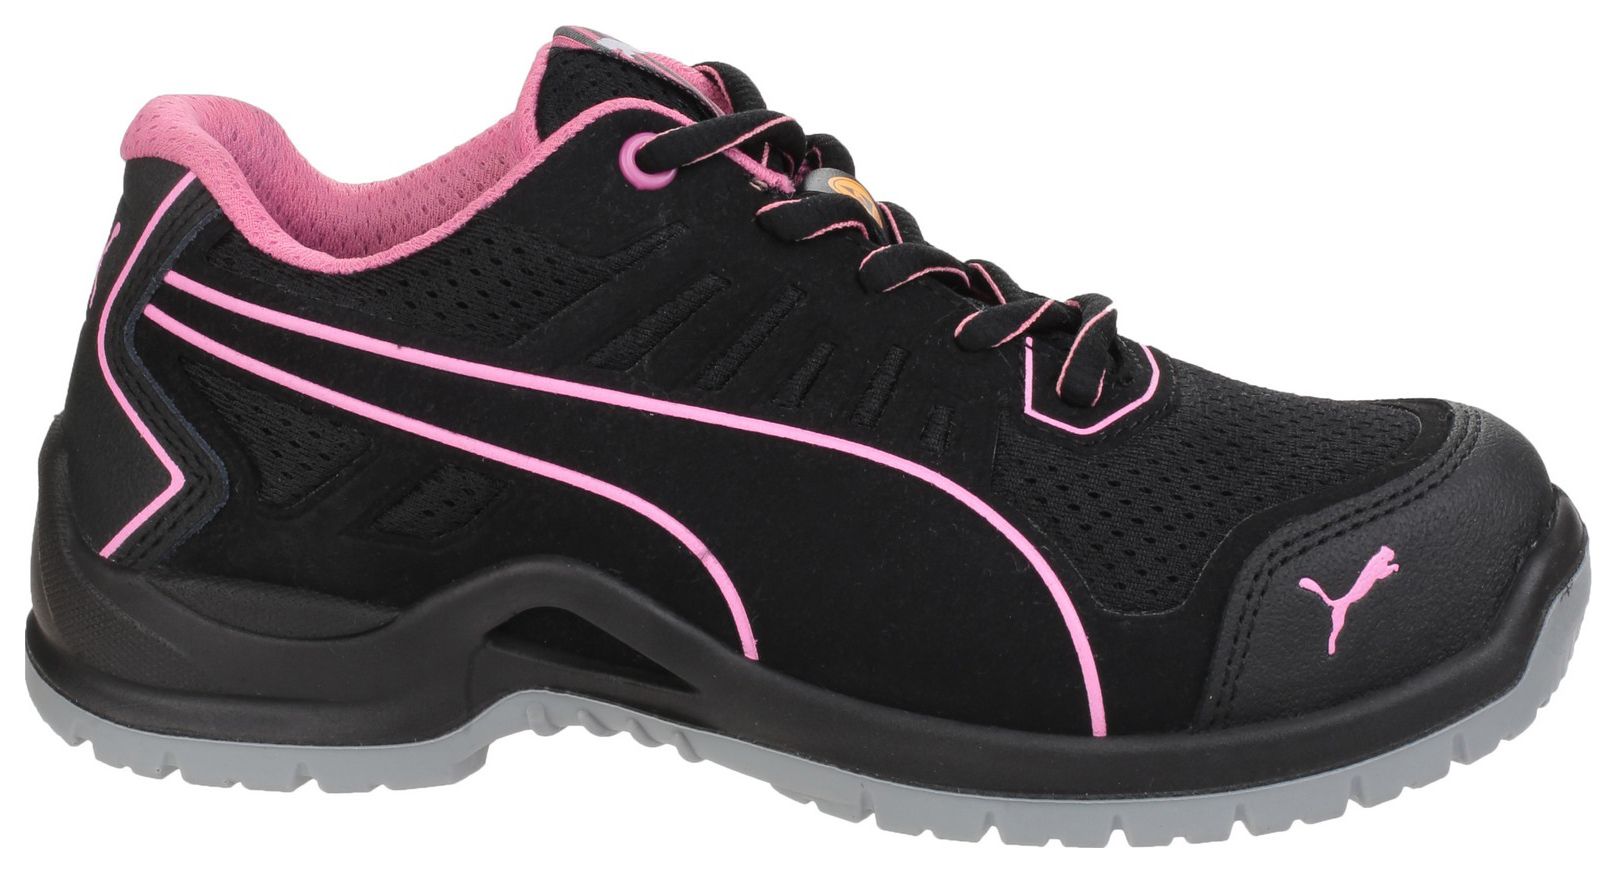 Puma Fuse Technic 644110 Womens Safety Trainers Black - Size 37